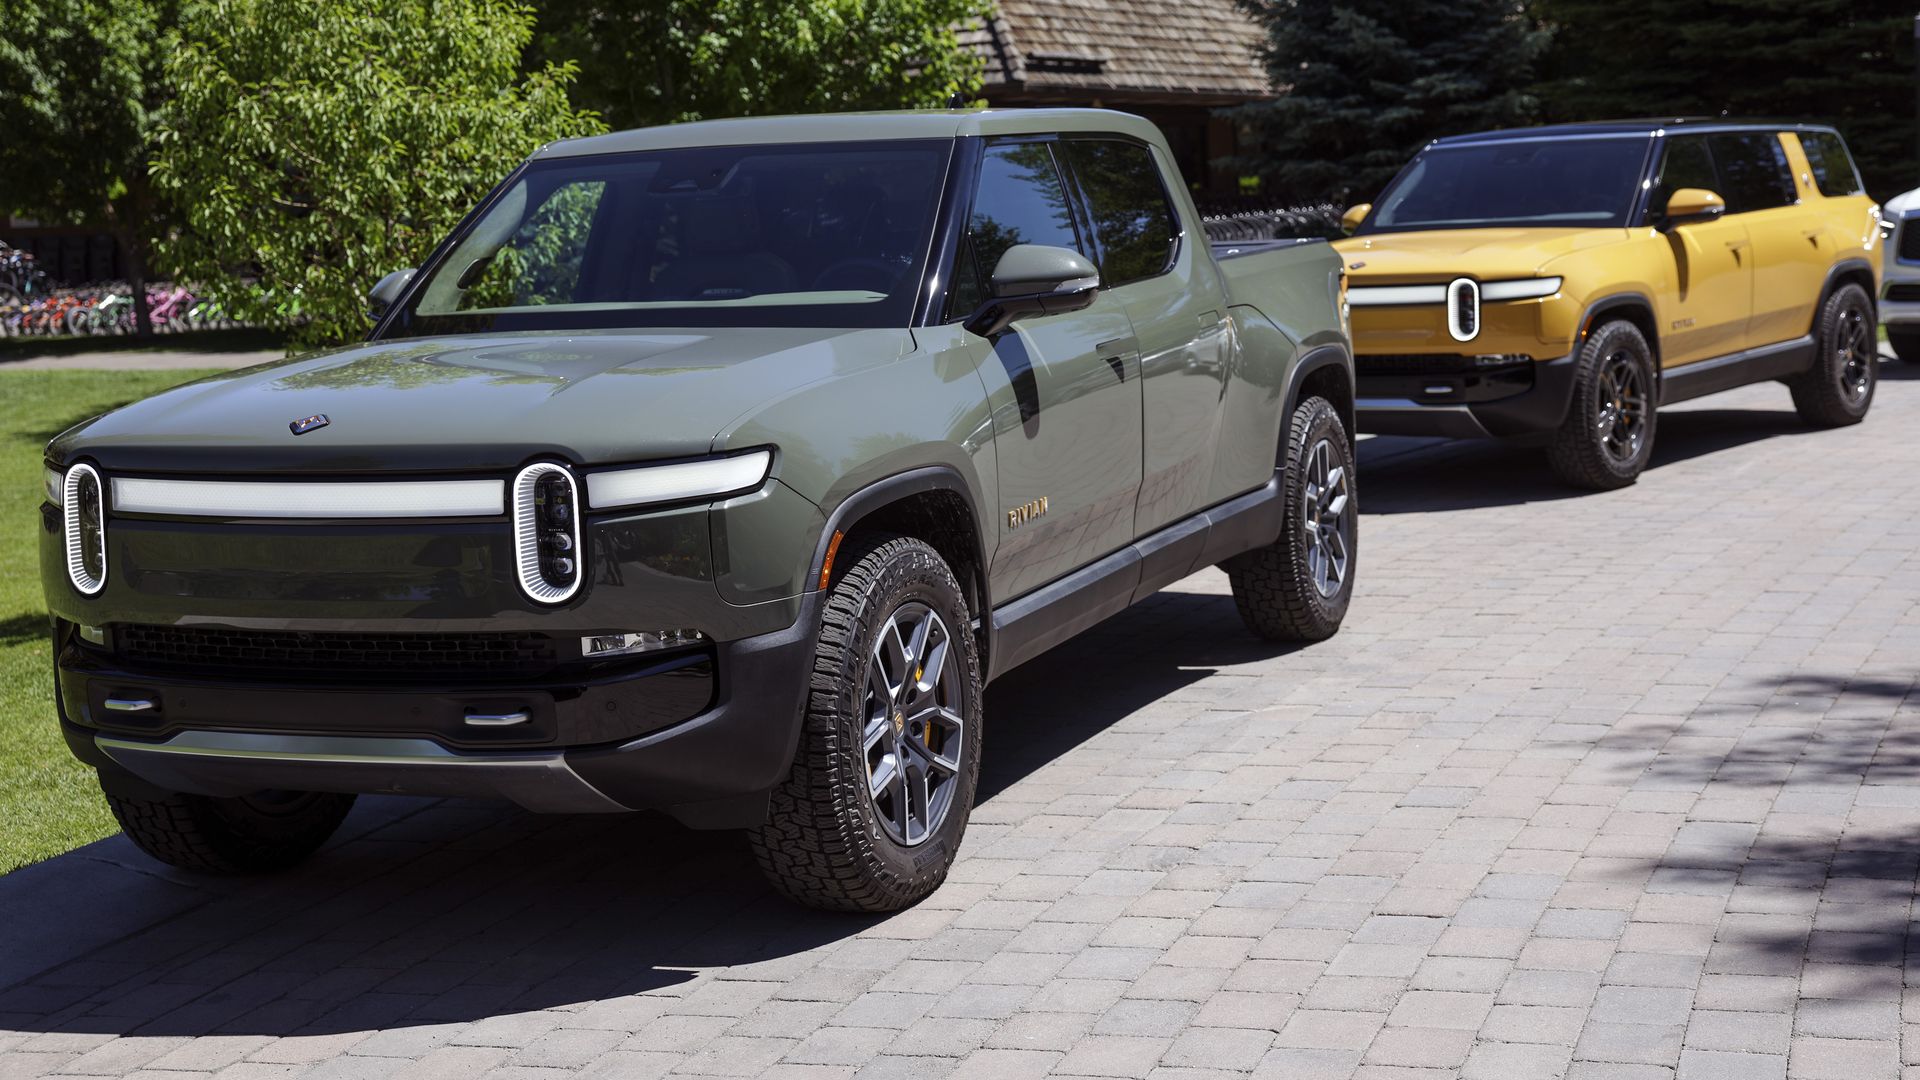  A Rivian R1T Truck and R1S SUV is parked outside the Allen & Company Sun Valley Conference on July 08, 2022 in Sun Valley, Idaho.